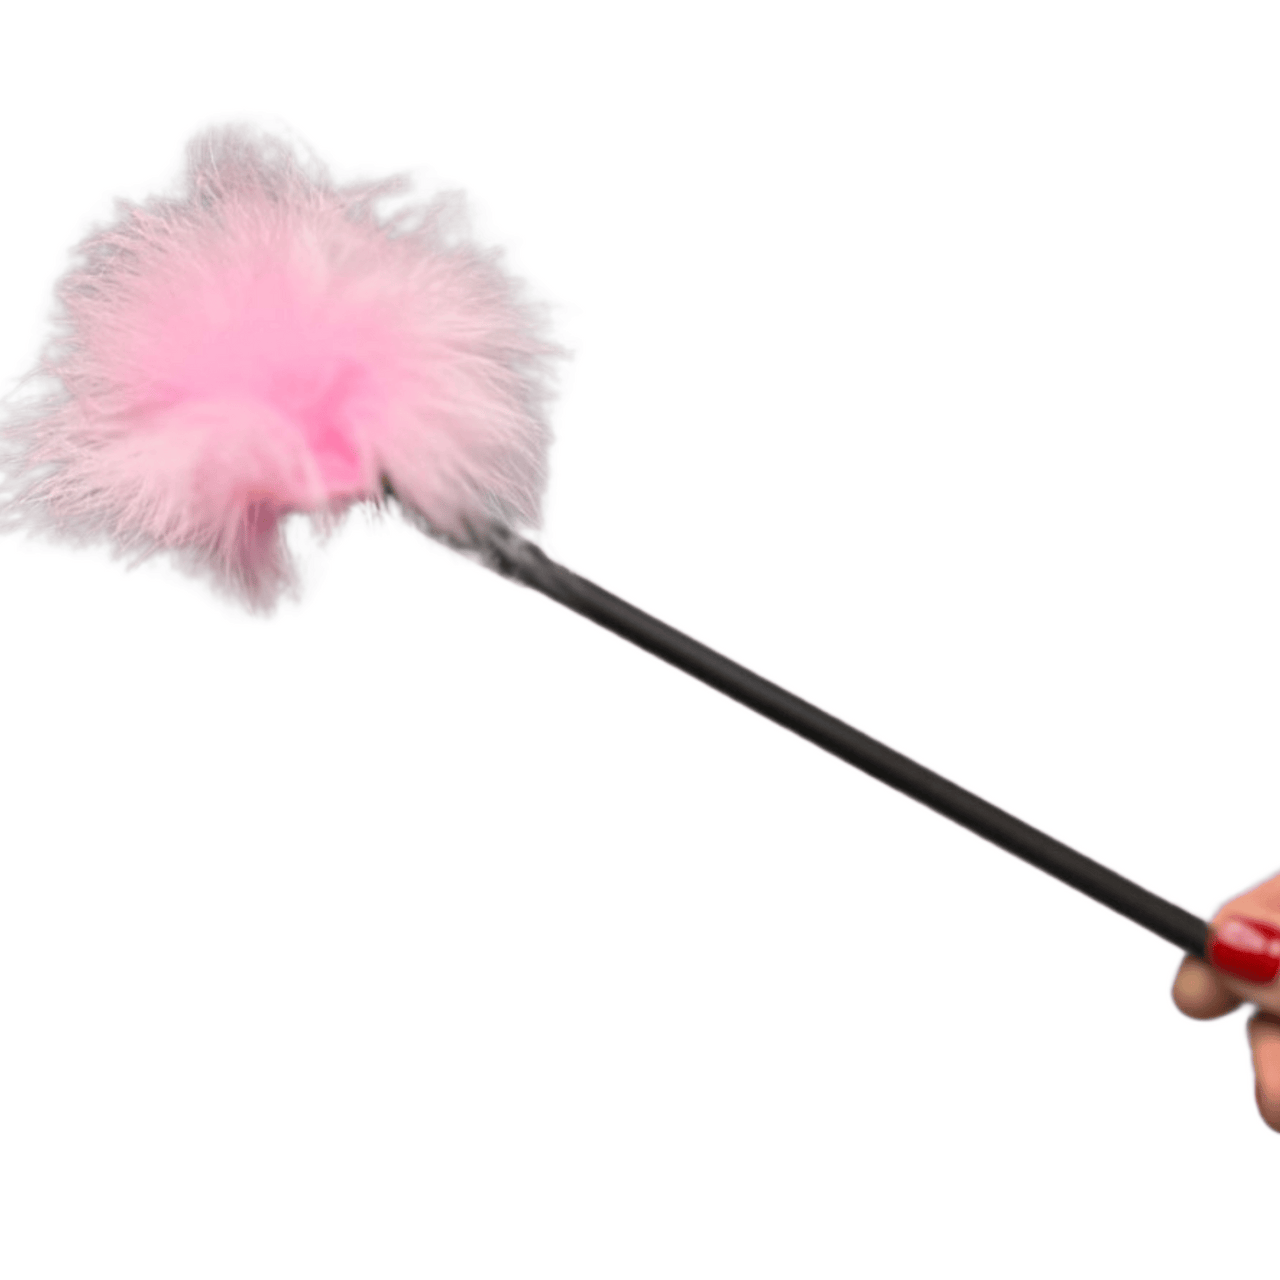 Enchanting Dual Sensation Play Wand Pink Feathers & Black Rubber Tassels for Sensory Pleasures